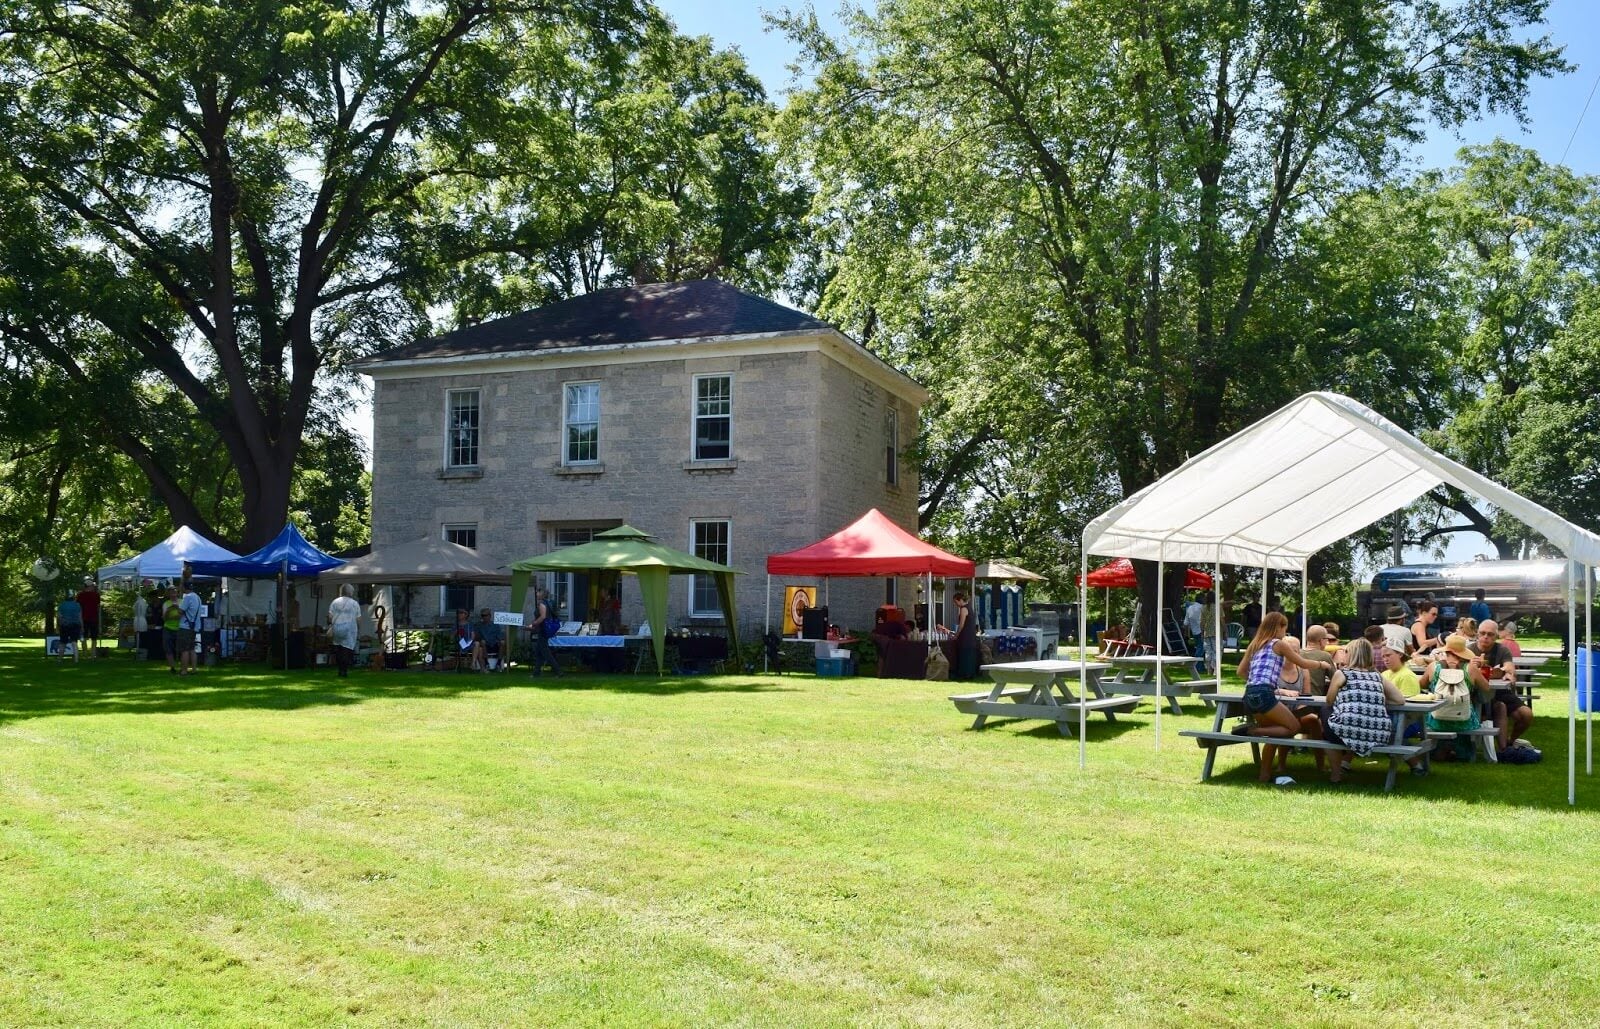 A stone farmhouse during the day with an event going on; people sitting under tents and eating